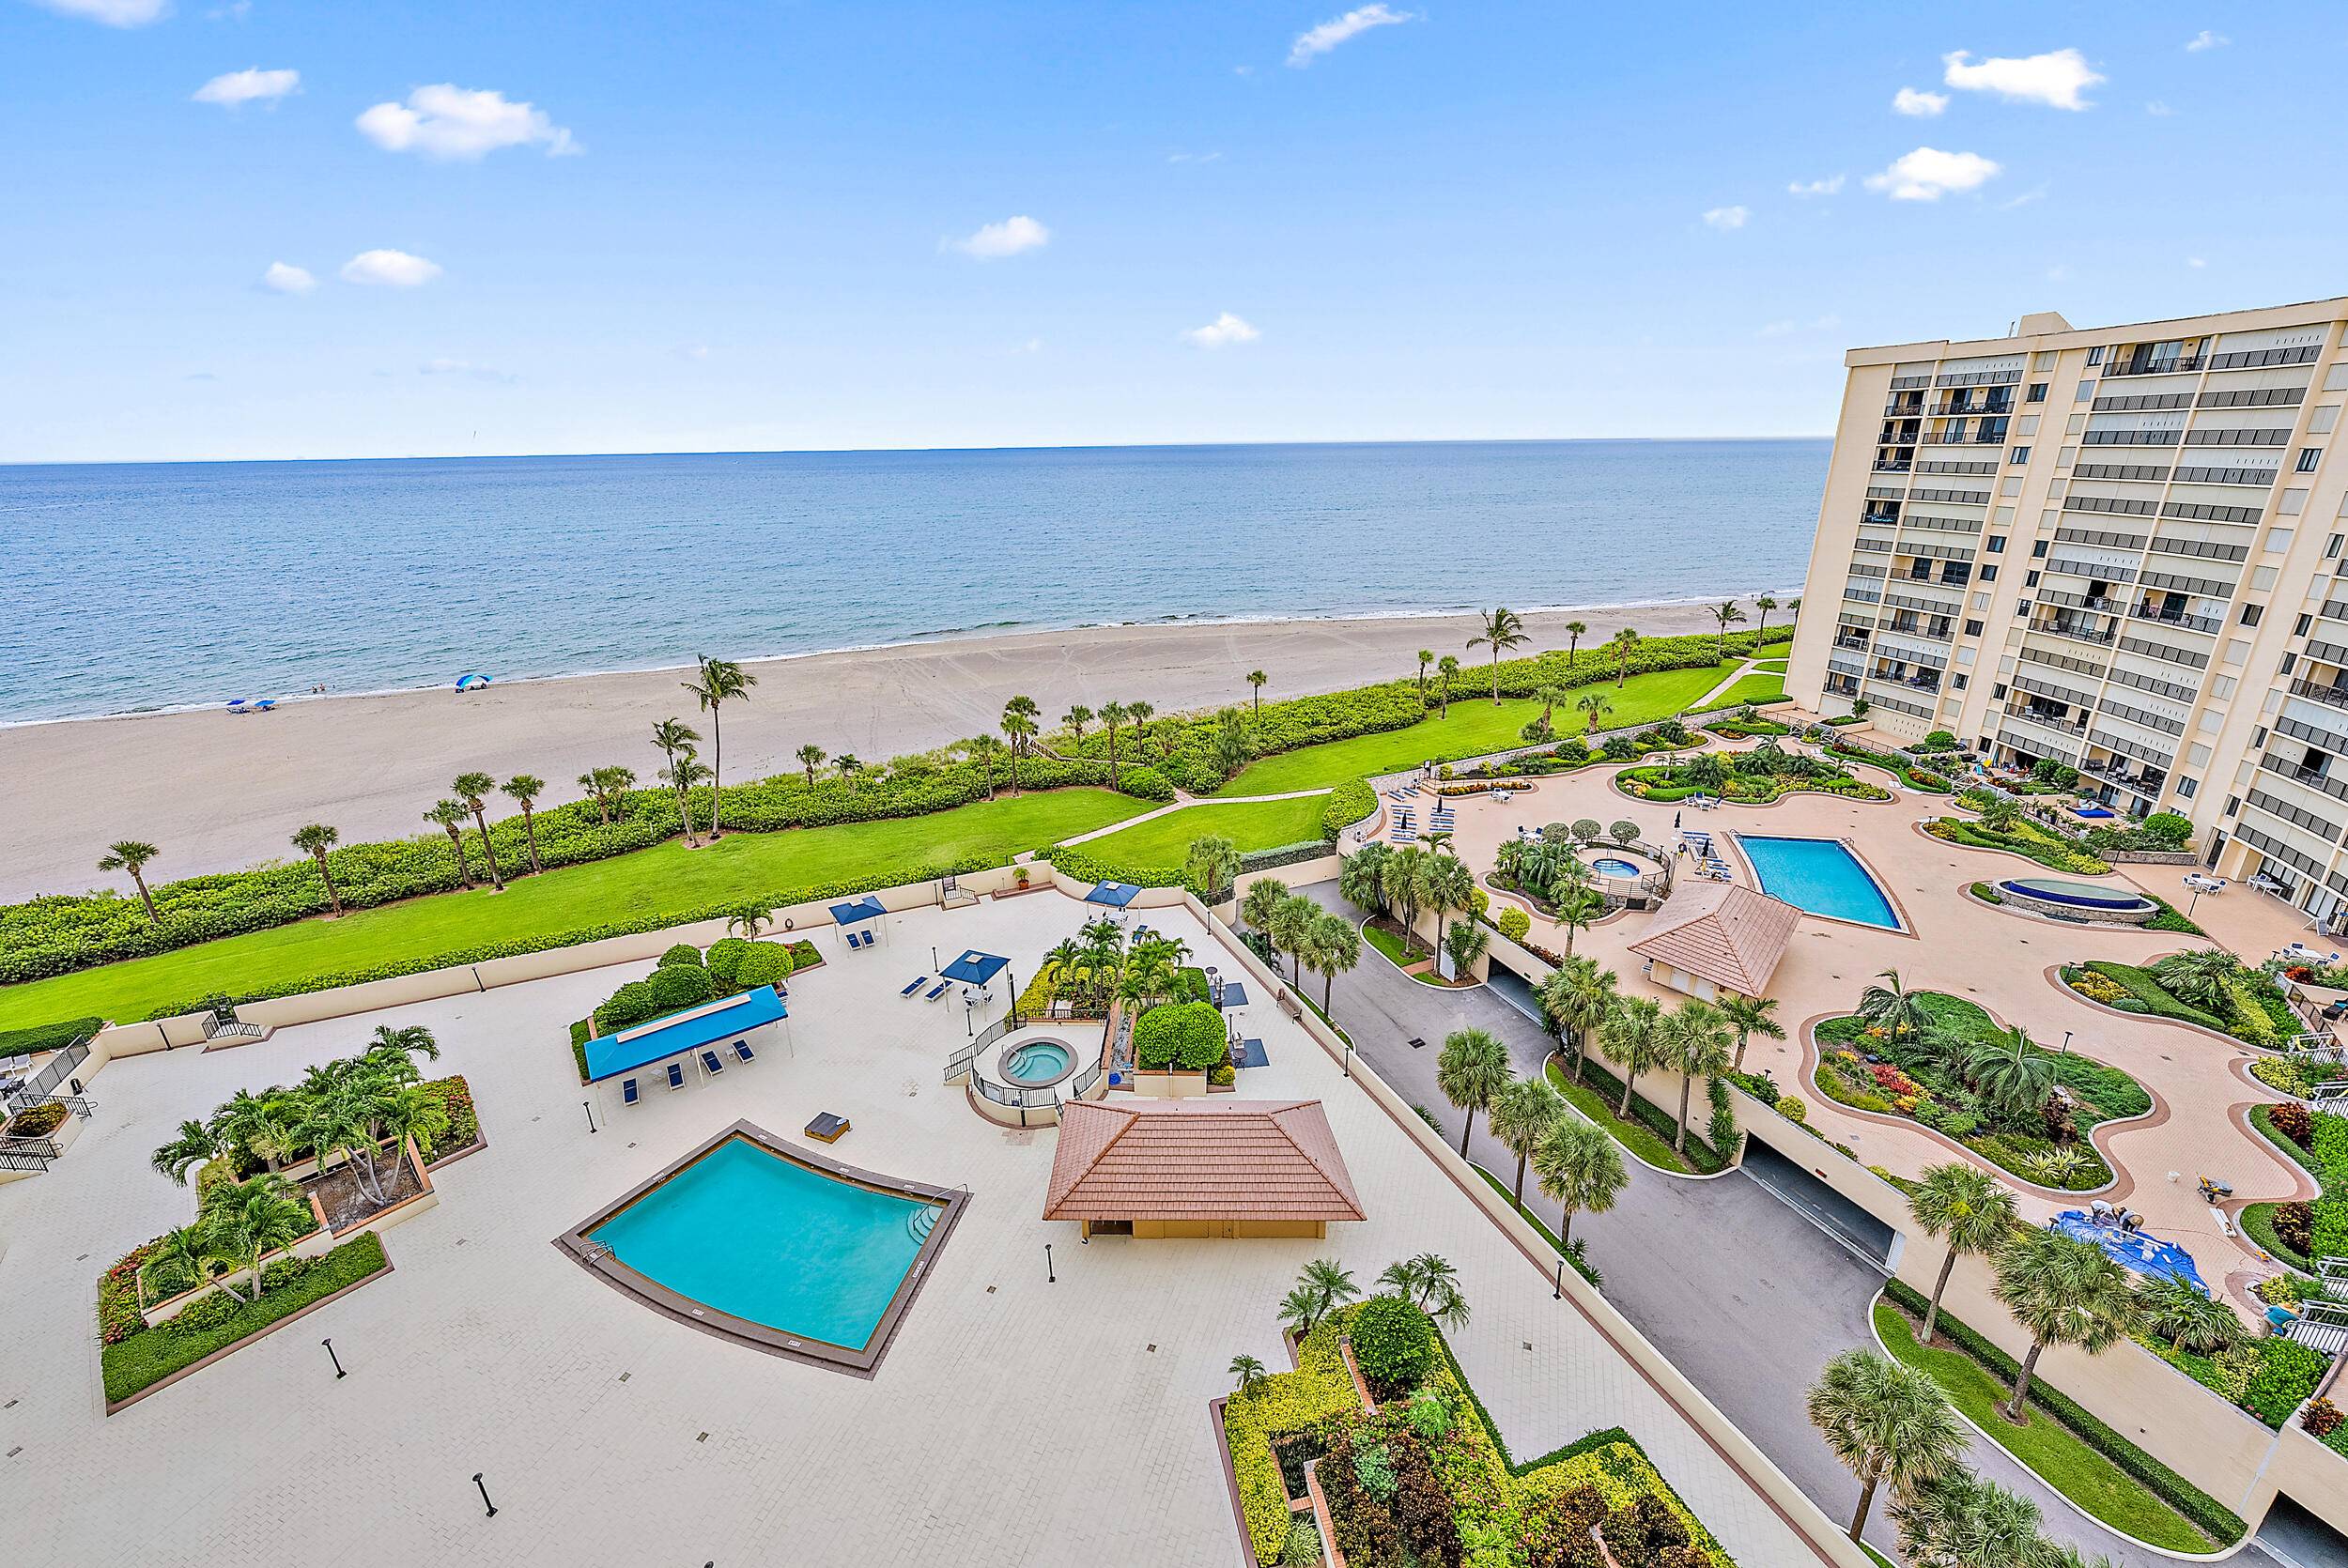 Have you been searching for a stunning furnished rental on the beach to get away and enjoy Oceanfront living ?